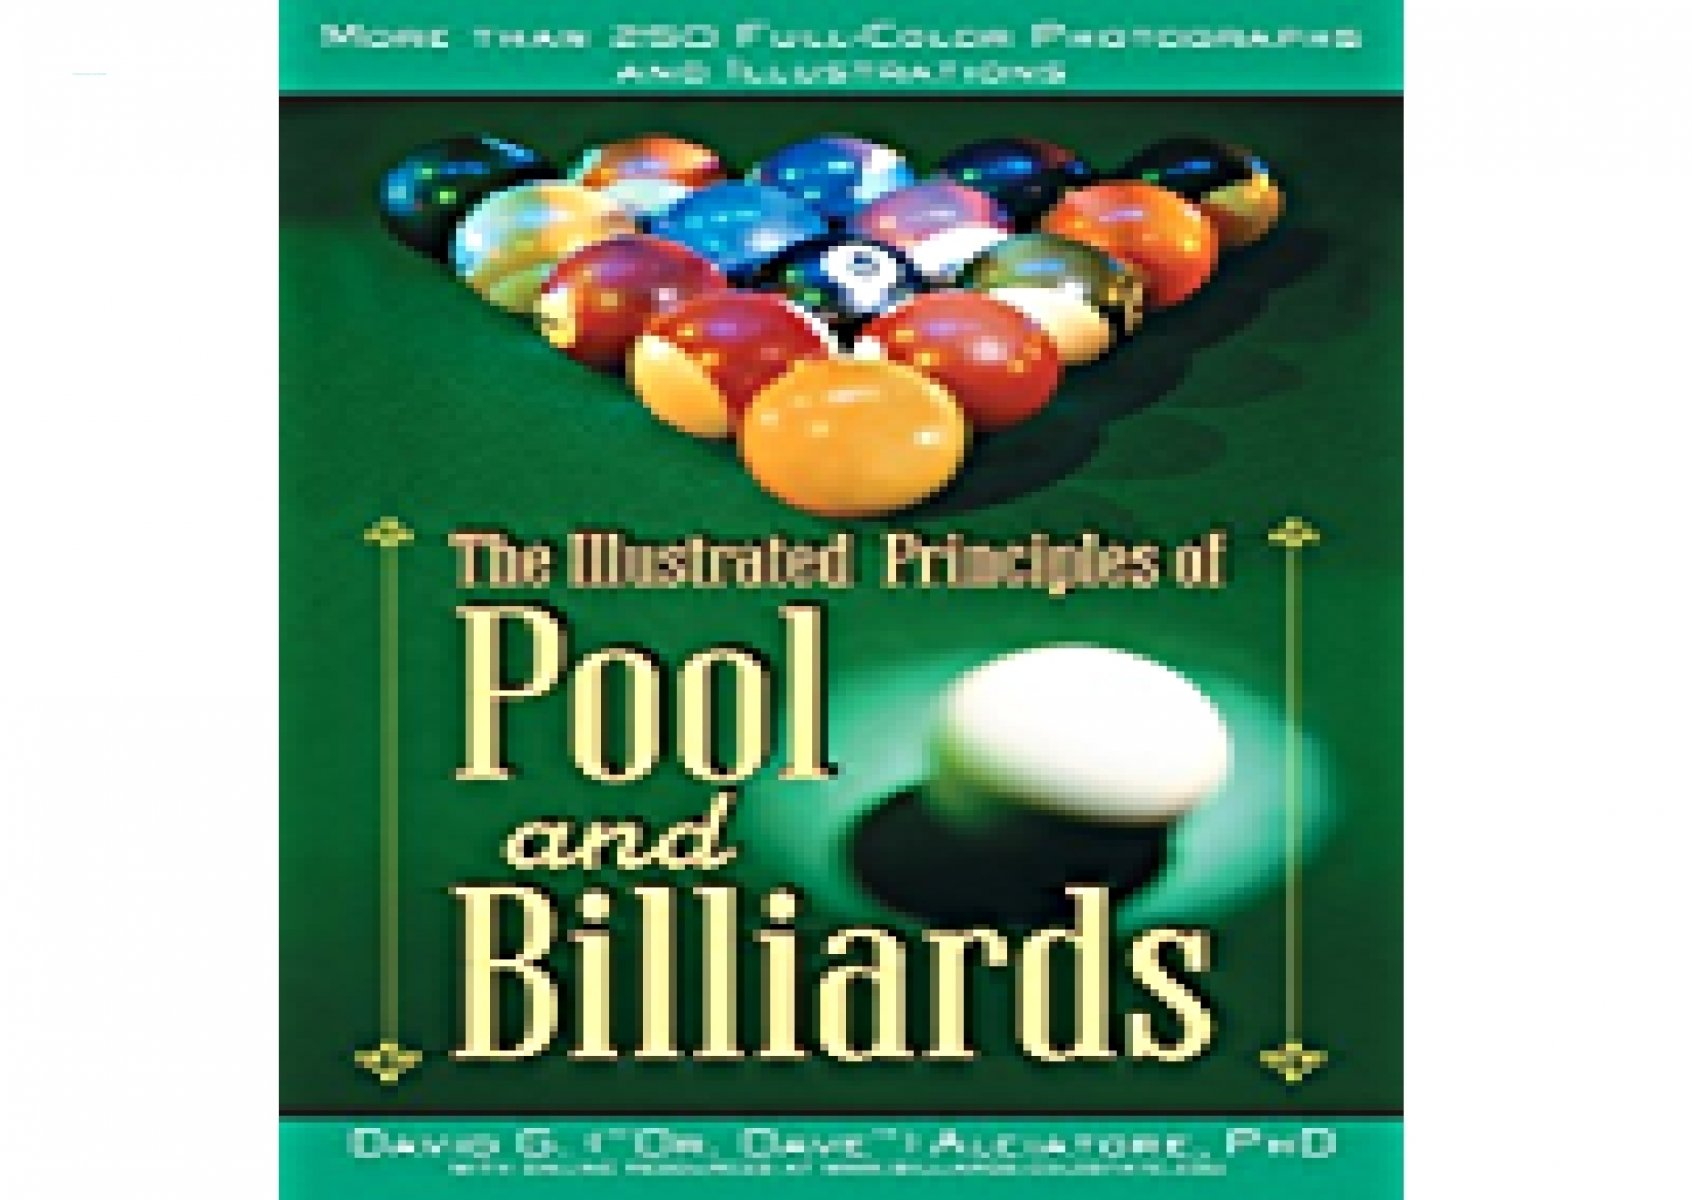 the illustrated principles of pool and billiards download